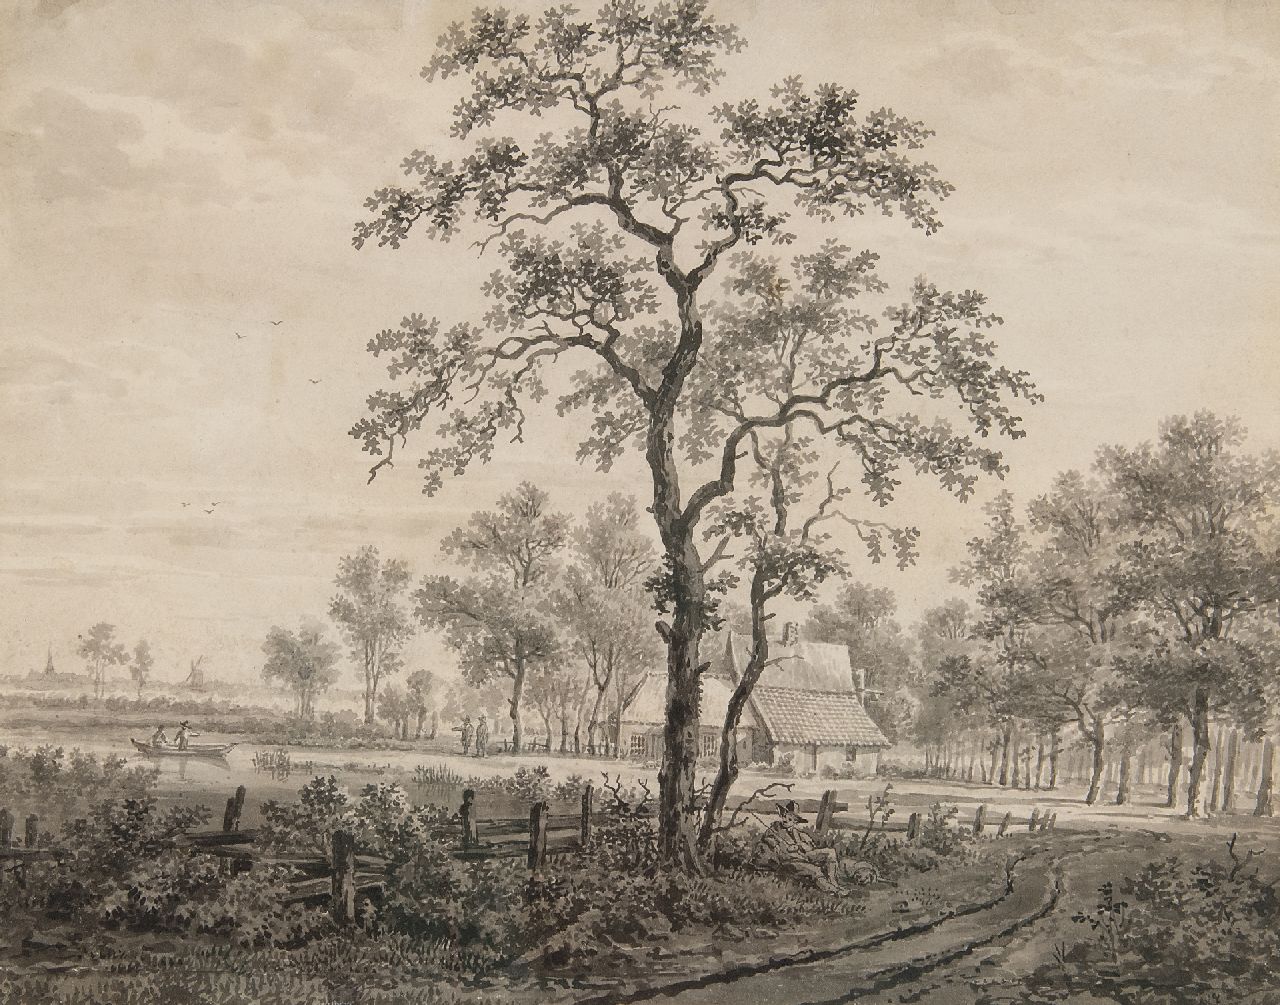 Göbell G.H.  | Gerrit Hendrik Göbell | Watercolours and drawings offered for sale | Landscape at Rijssen, pen, brush and ink on paper 22.1 x 27.8 cm, signed on the reverse and dated on the reverse 1830